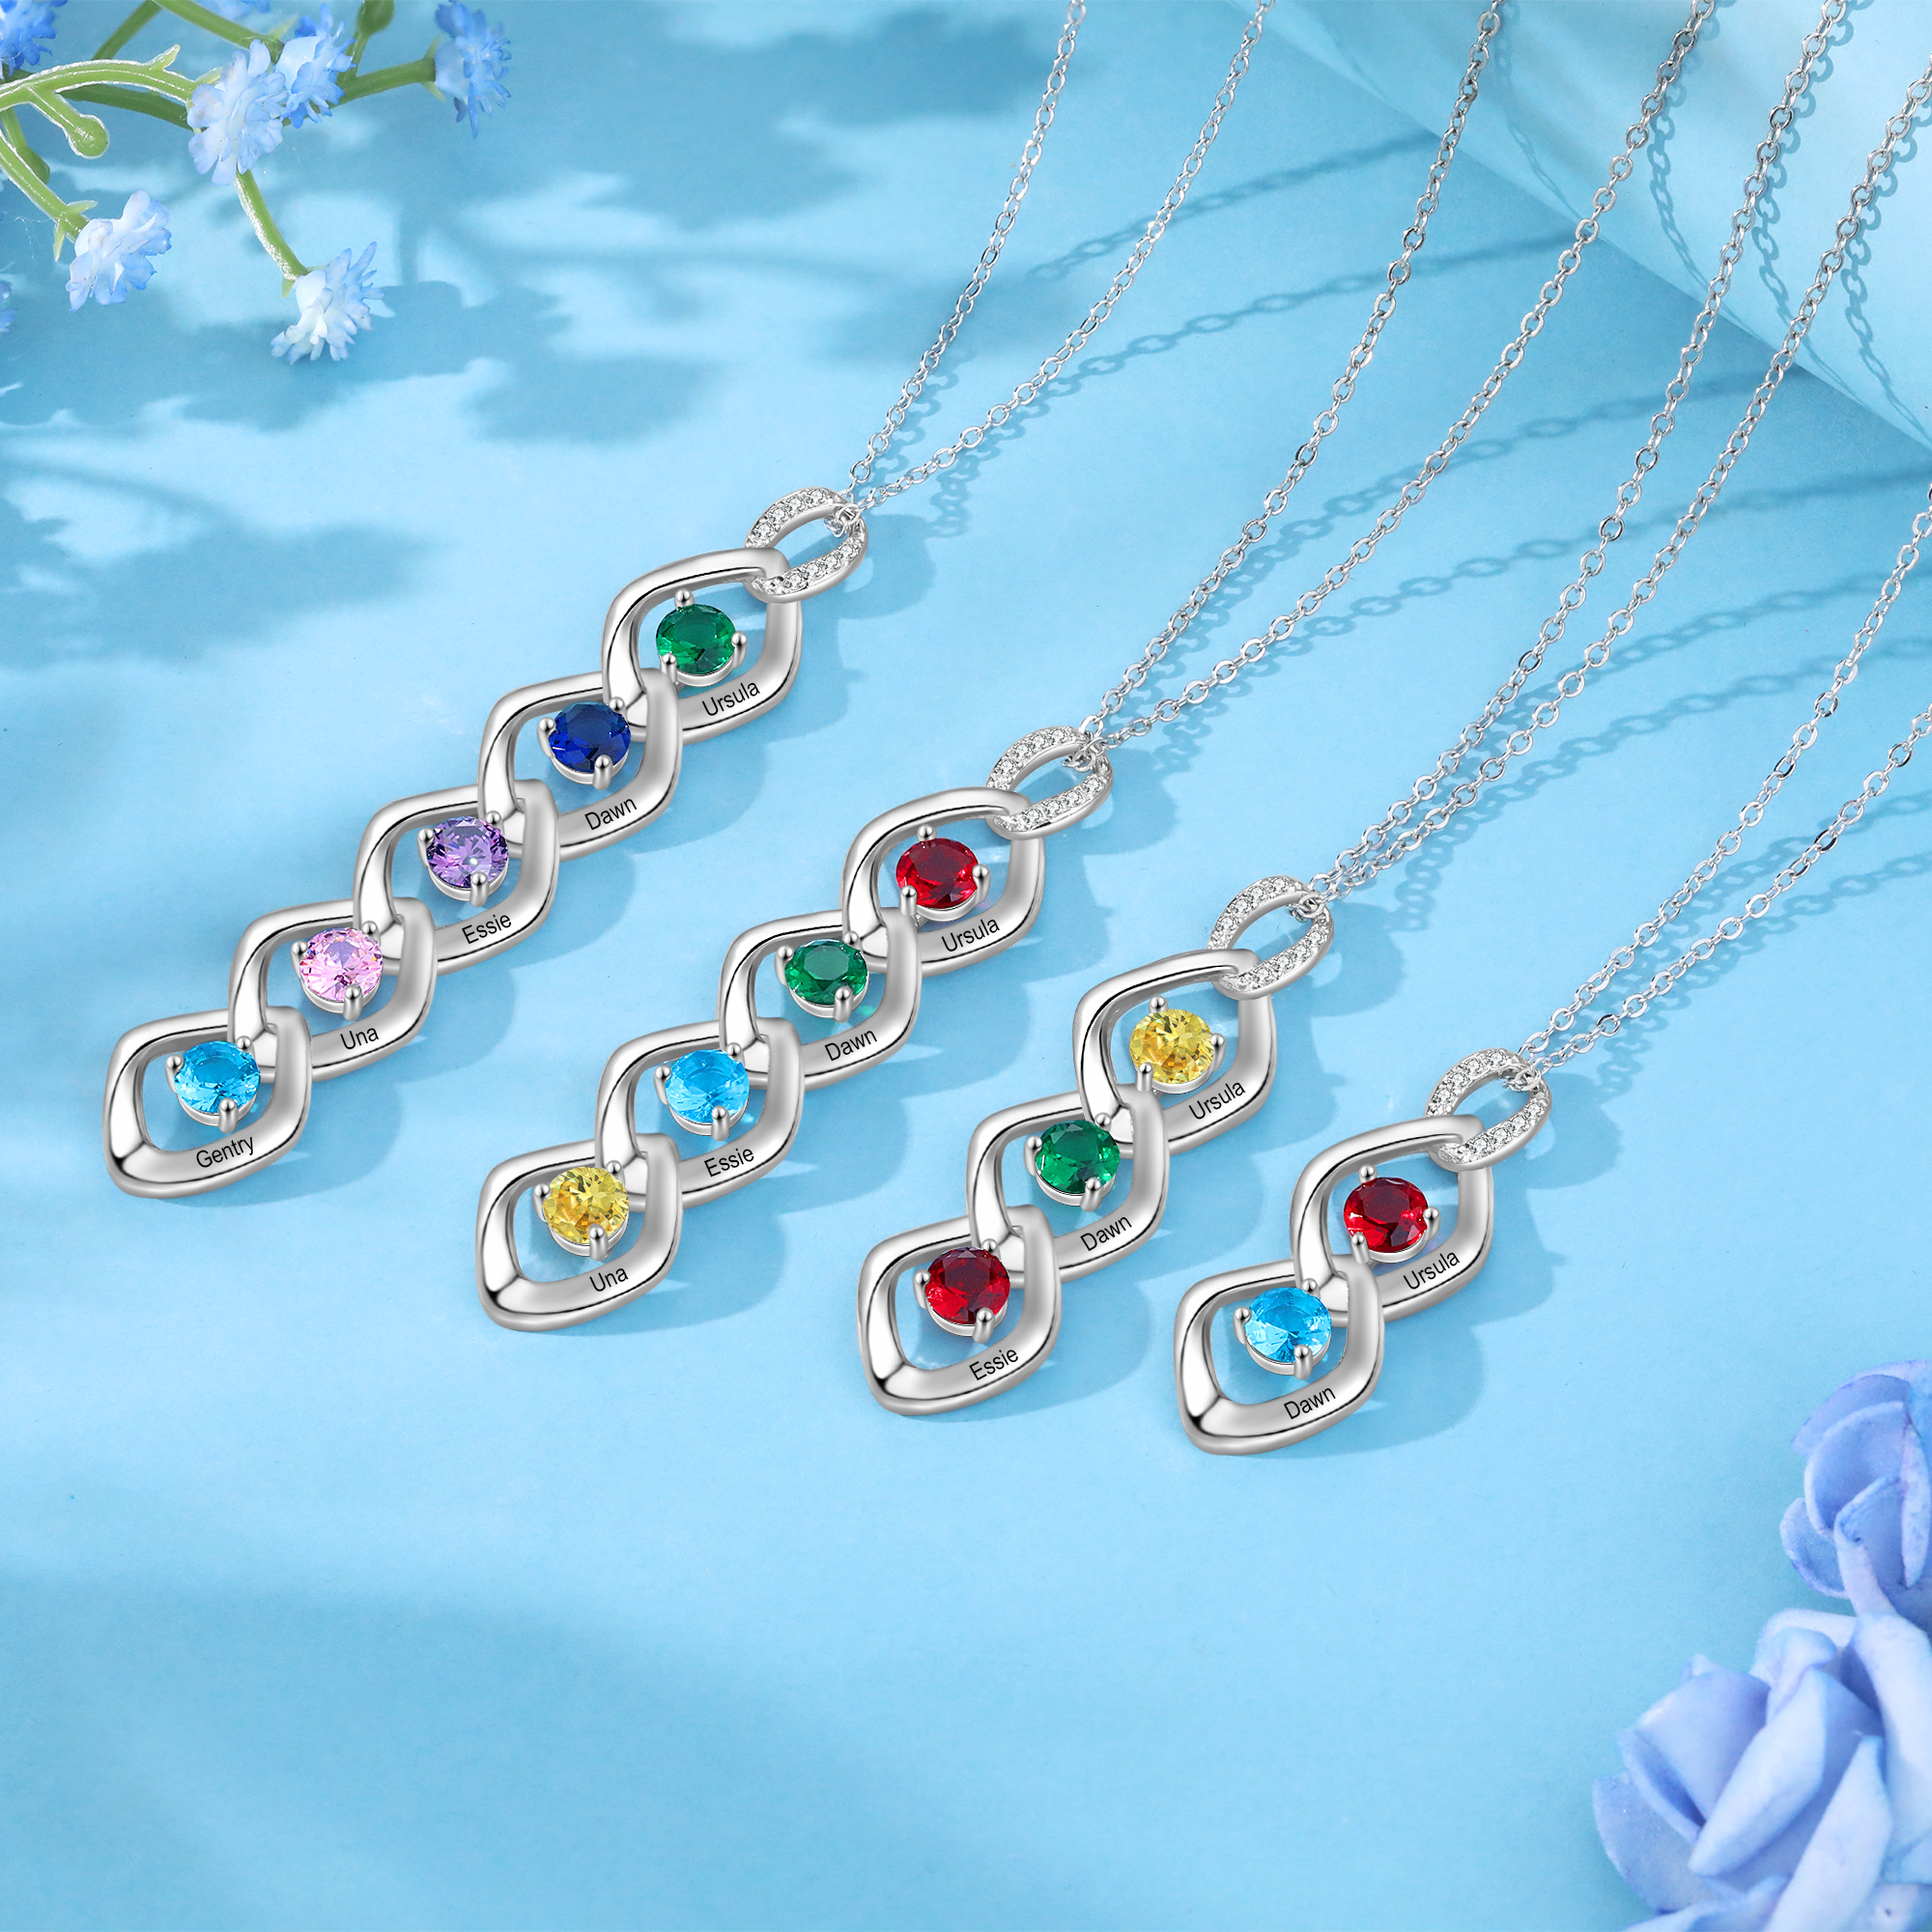 2 Names - Personalized Birthstone Necklace With Name Engraved For A Special Gift For Mom/Grandma